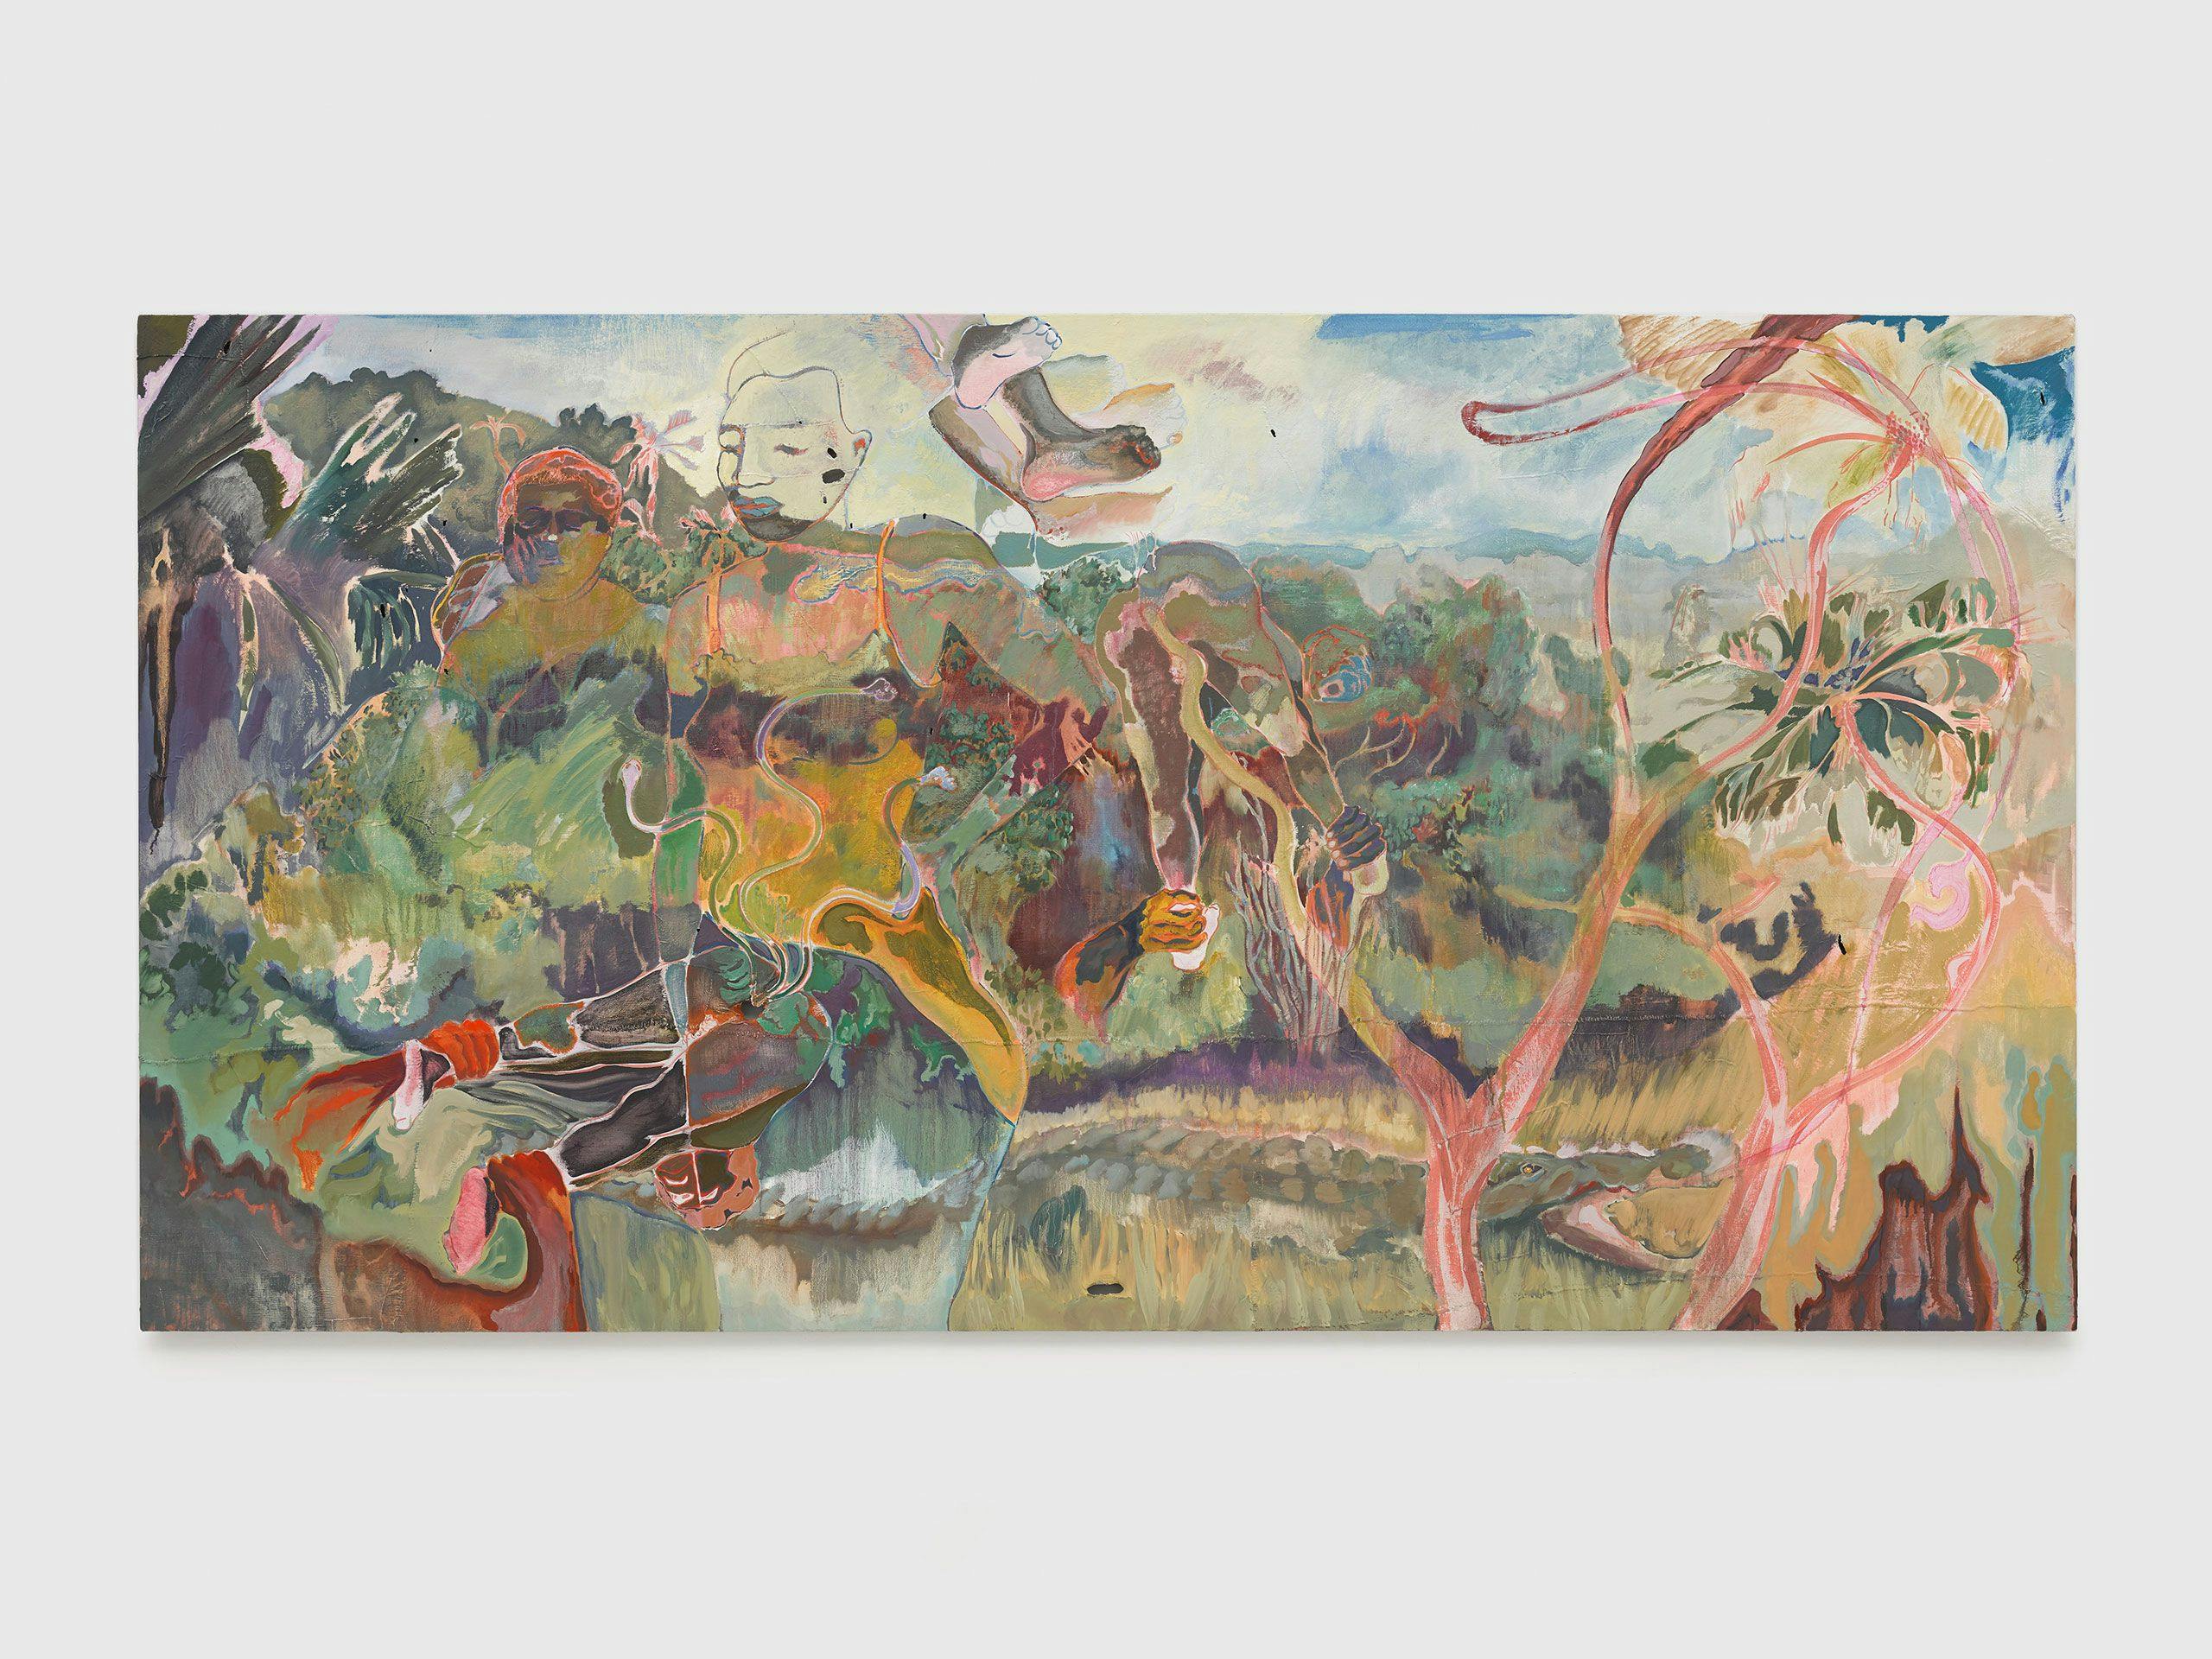 An oil on Lubugo bark cloth painting by Michael Armitage, titled The Paradise Edict, dated 2019.